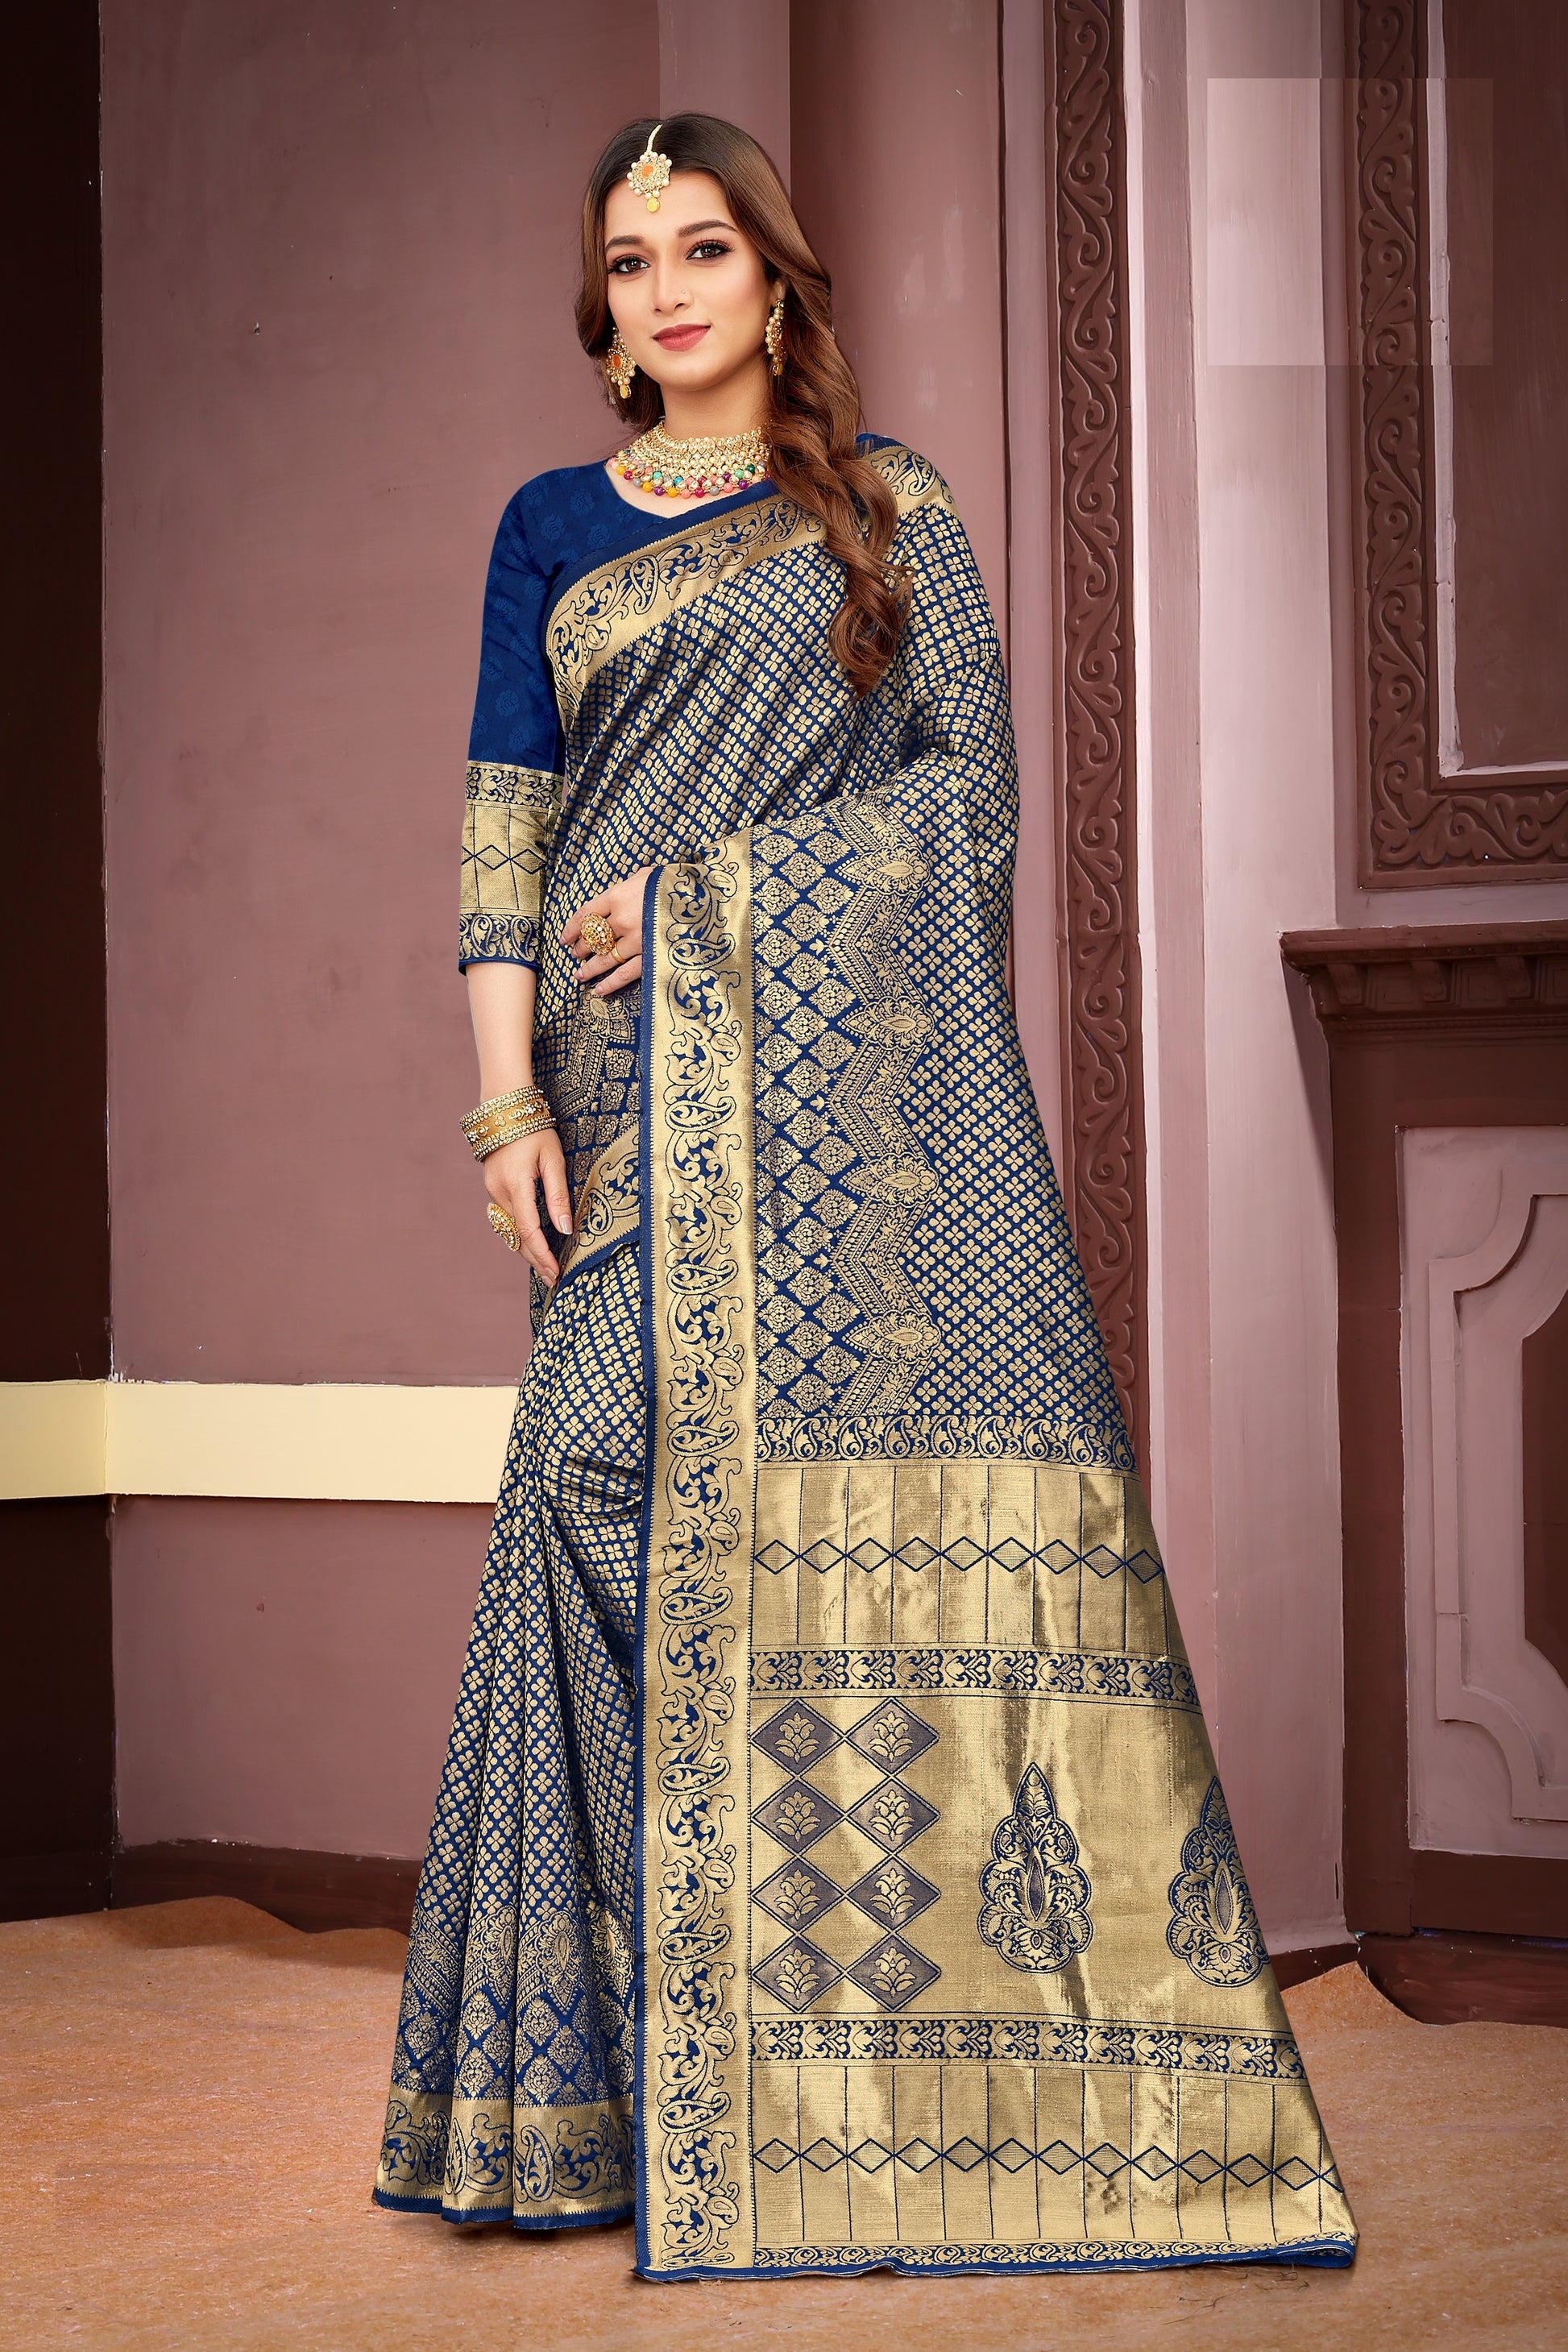 FASHION BOOMS ROYAL BLUE BANARSI SILK TRADITIONAL SAREE WITH 7 OTHER COLORS FOR WHOLE FAMILY TO WEAR ON ANY OCCASION .